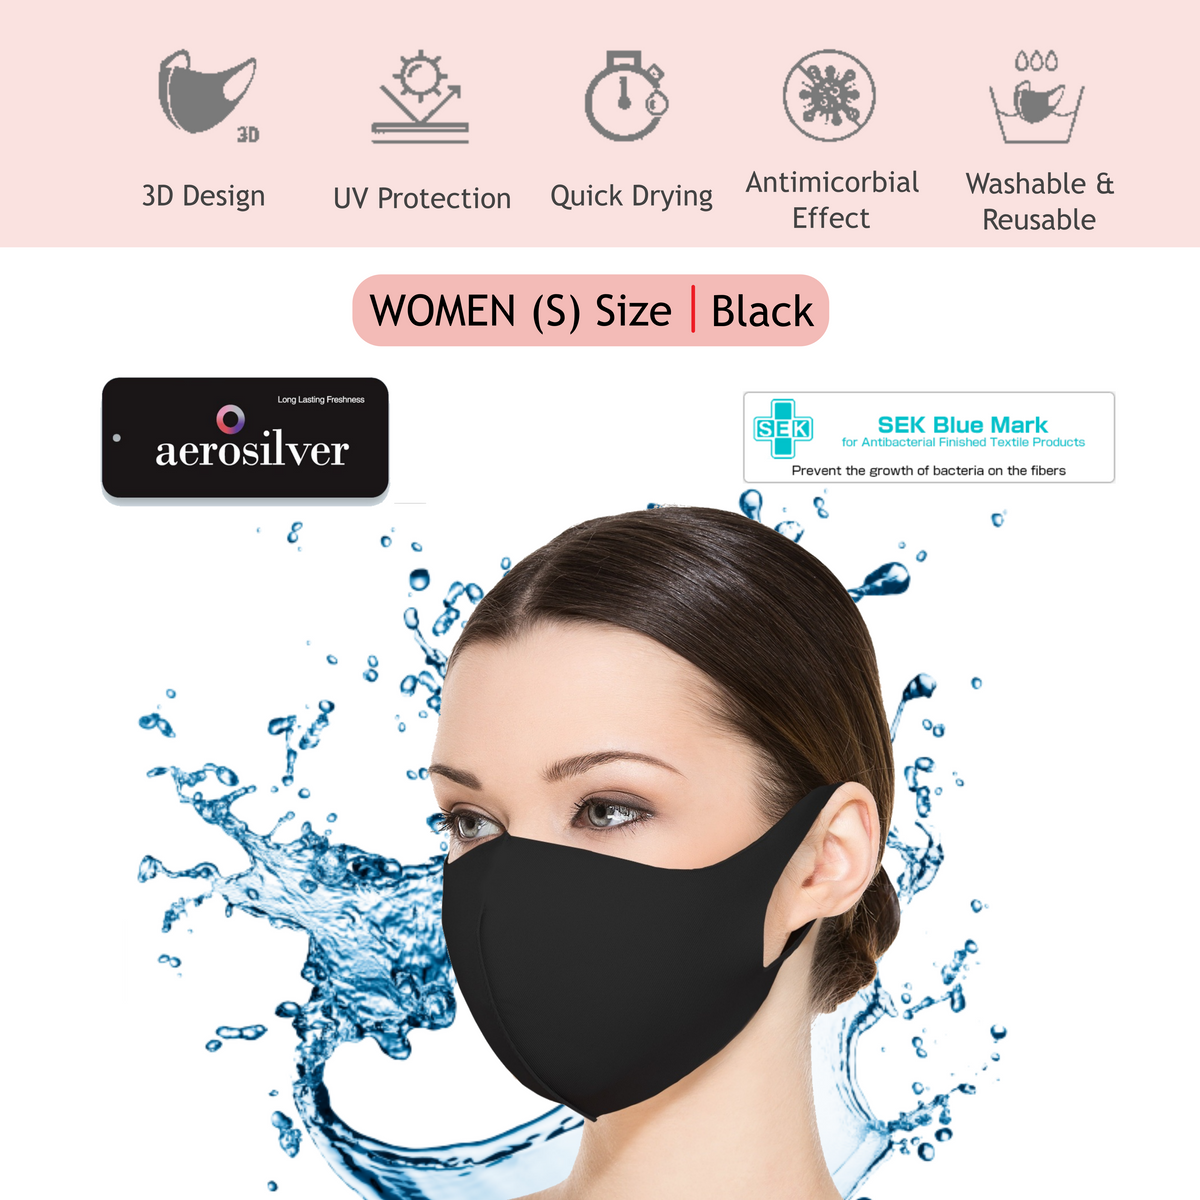 Buy Biofresh Ladies' Washable Anti-Microbial Face Mask 2024 Online